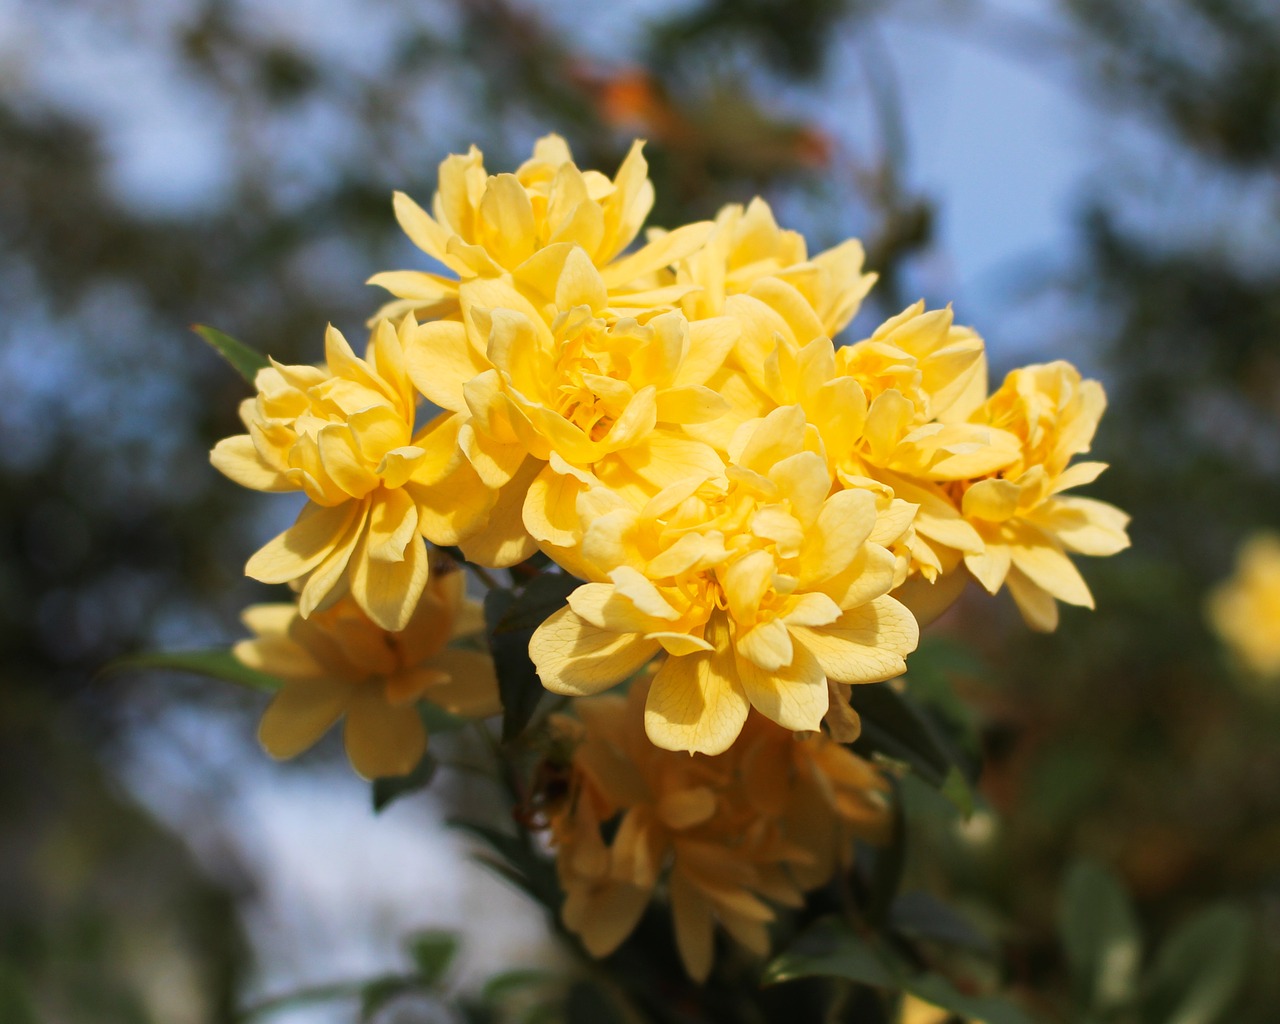 Climbing rose, rose blossoms, yellow, small, nature - free image from ...